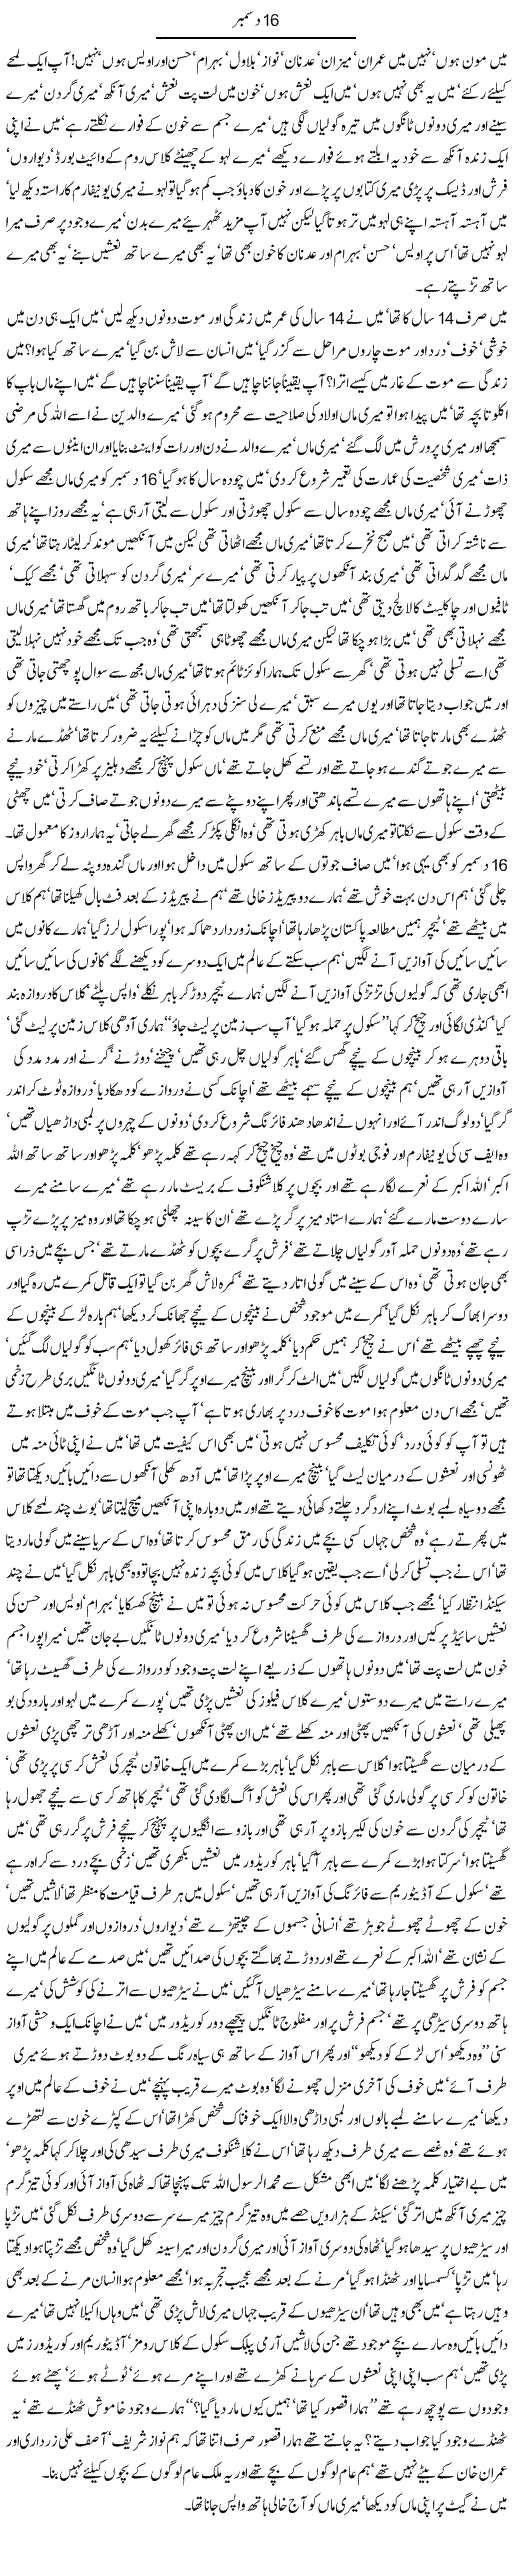 16 December by Javed Chaudhry